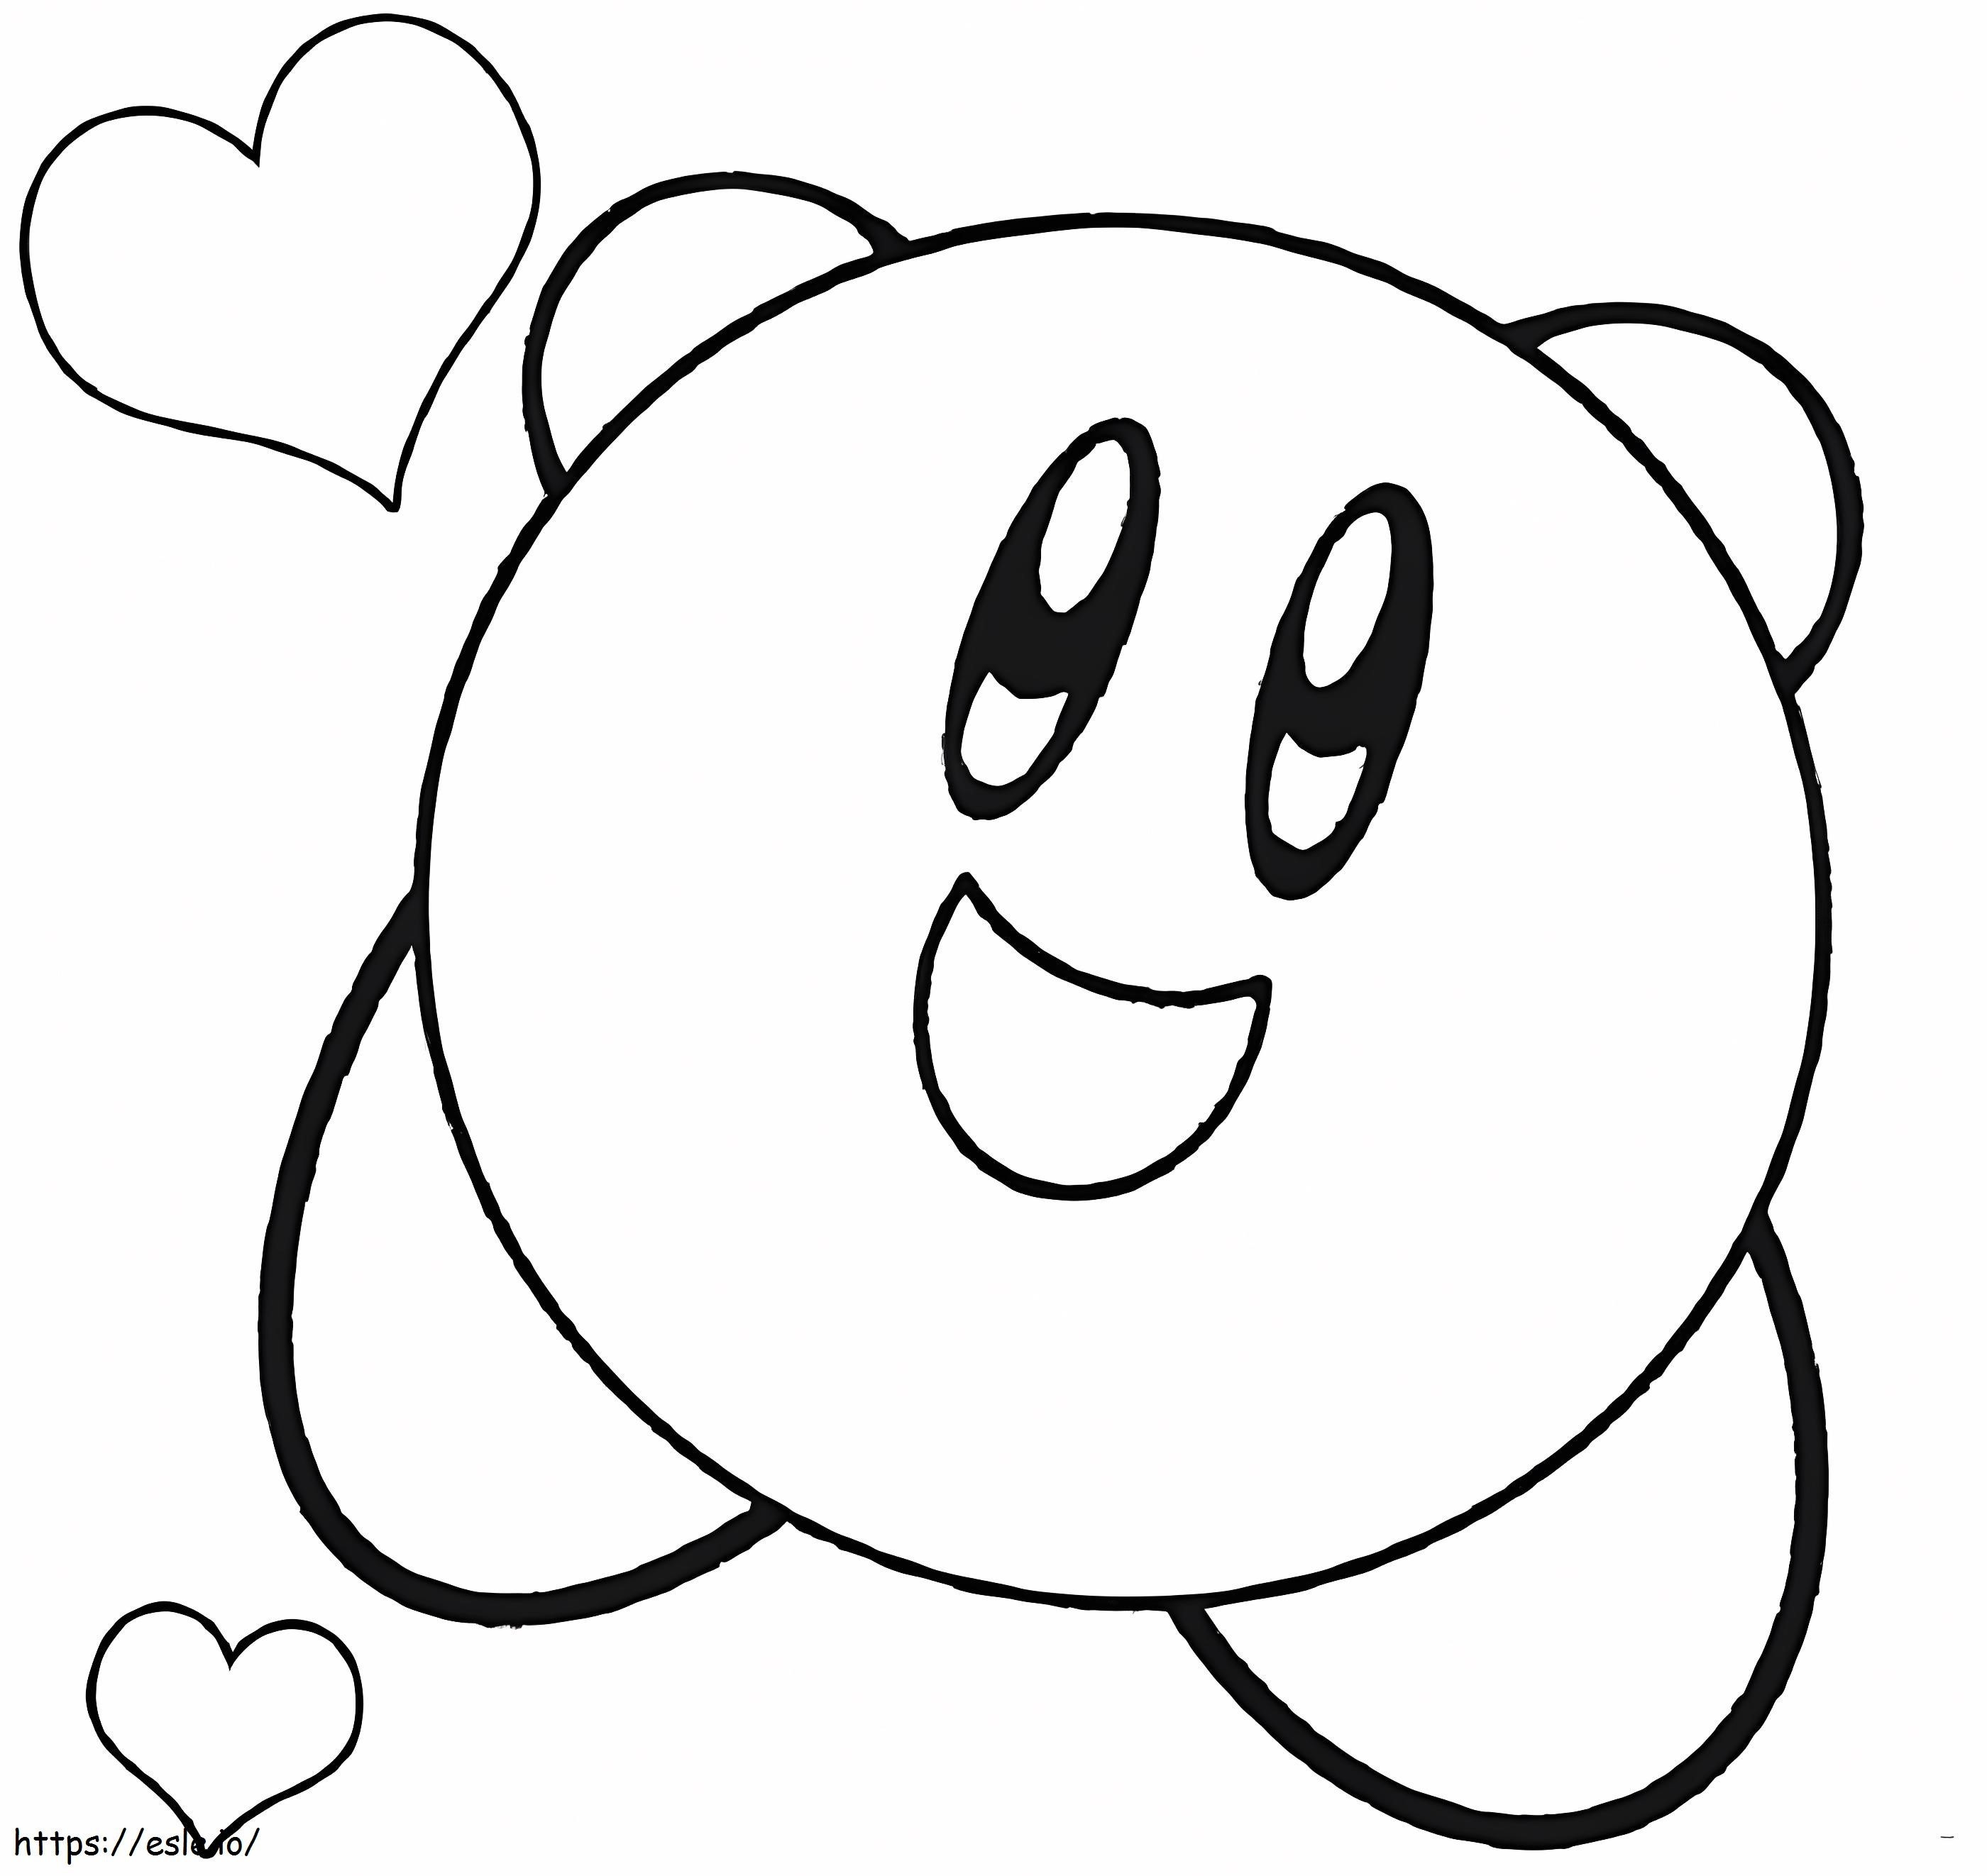 Kirby Mouse coloring page